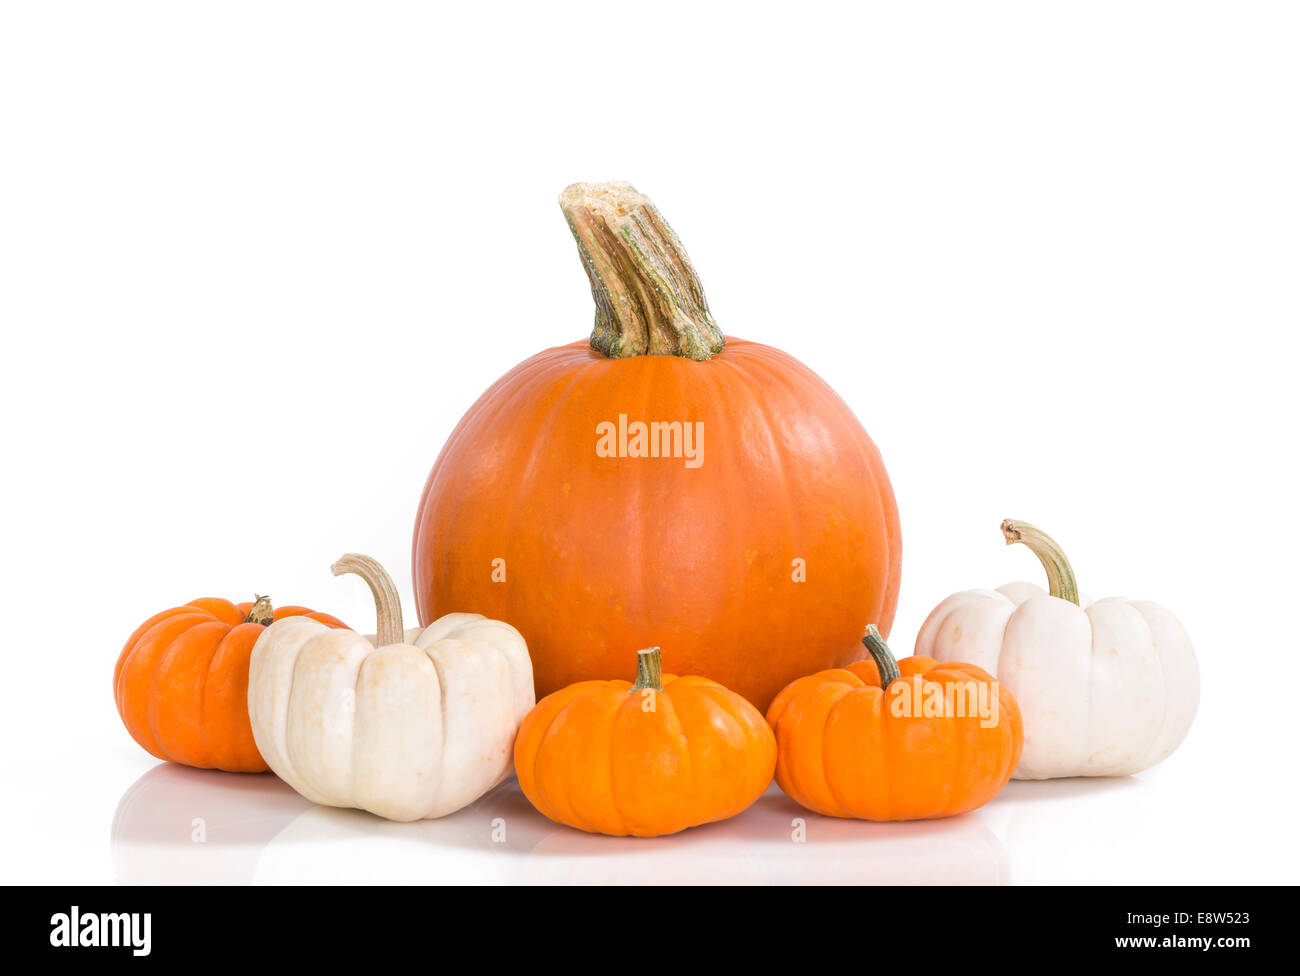 Pie pumpkin surrounded by mini pumpkins against white background Stock Photo